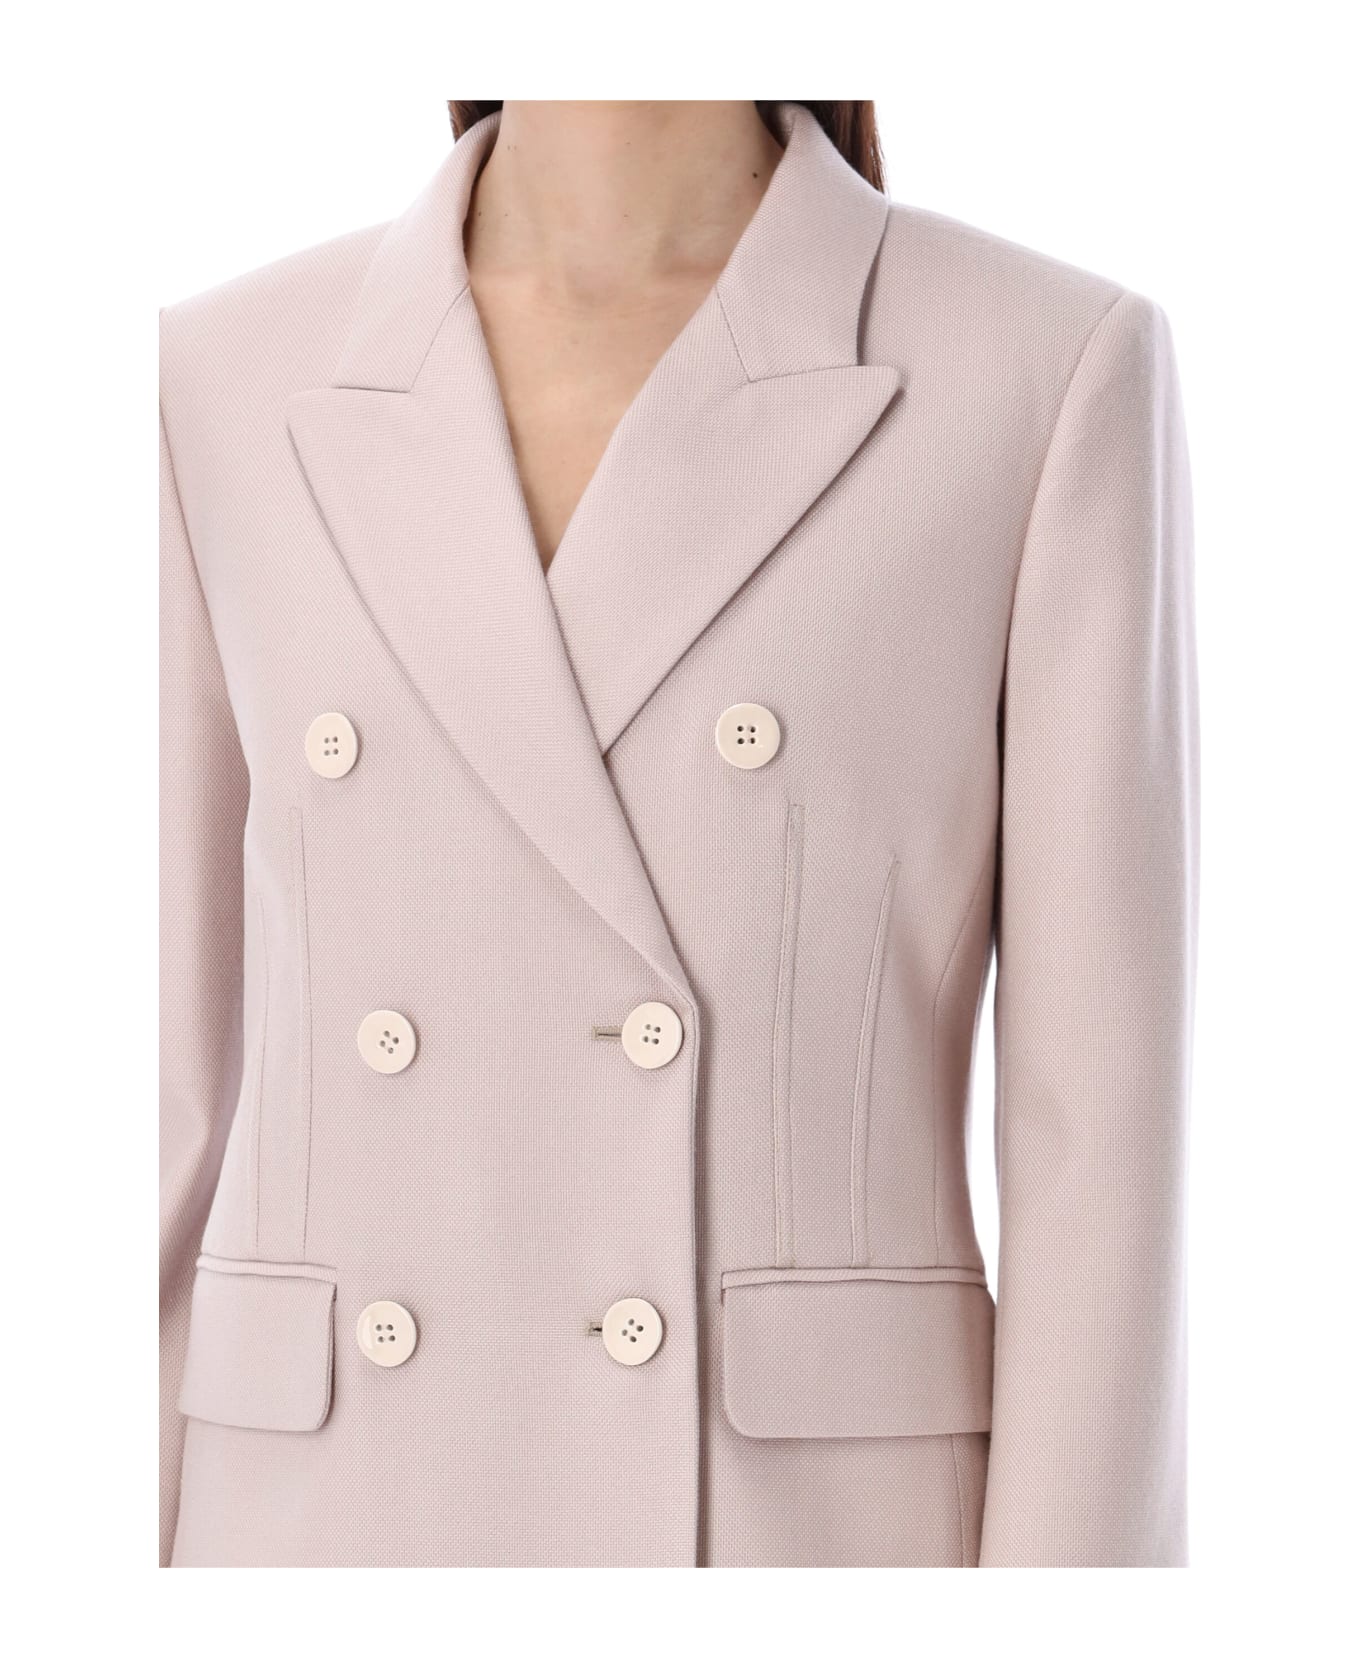 Chloé Double-breasted Blazer - LIGHT PINK